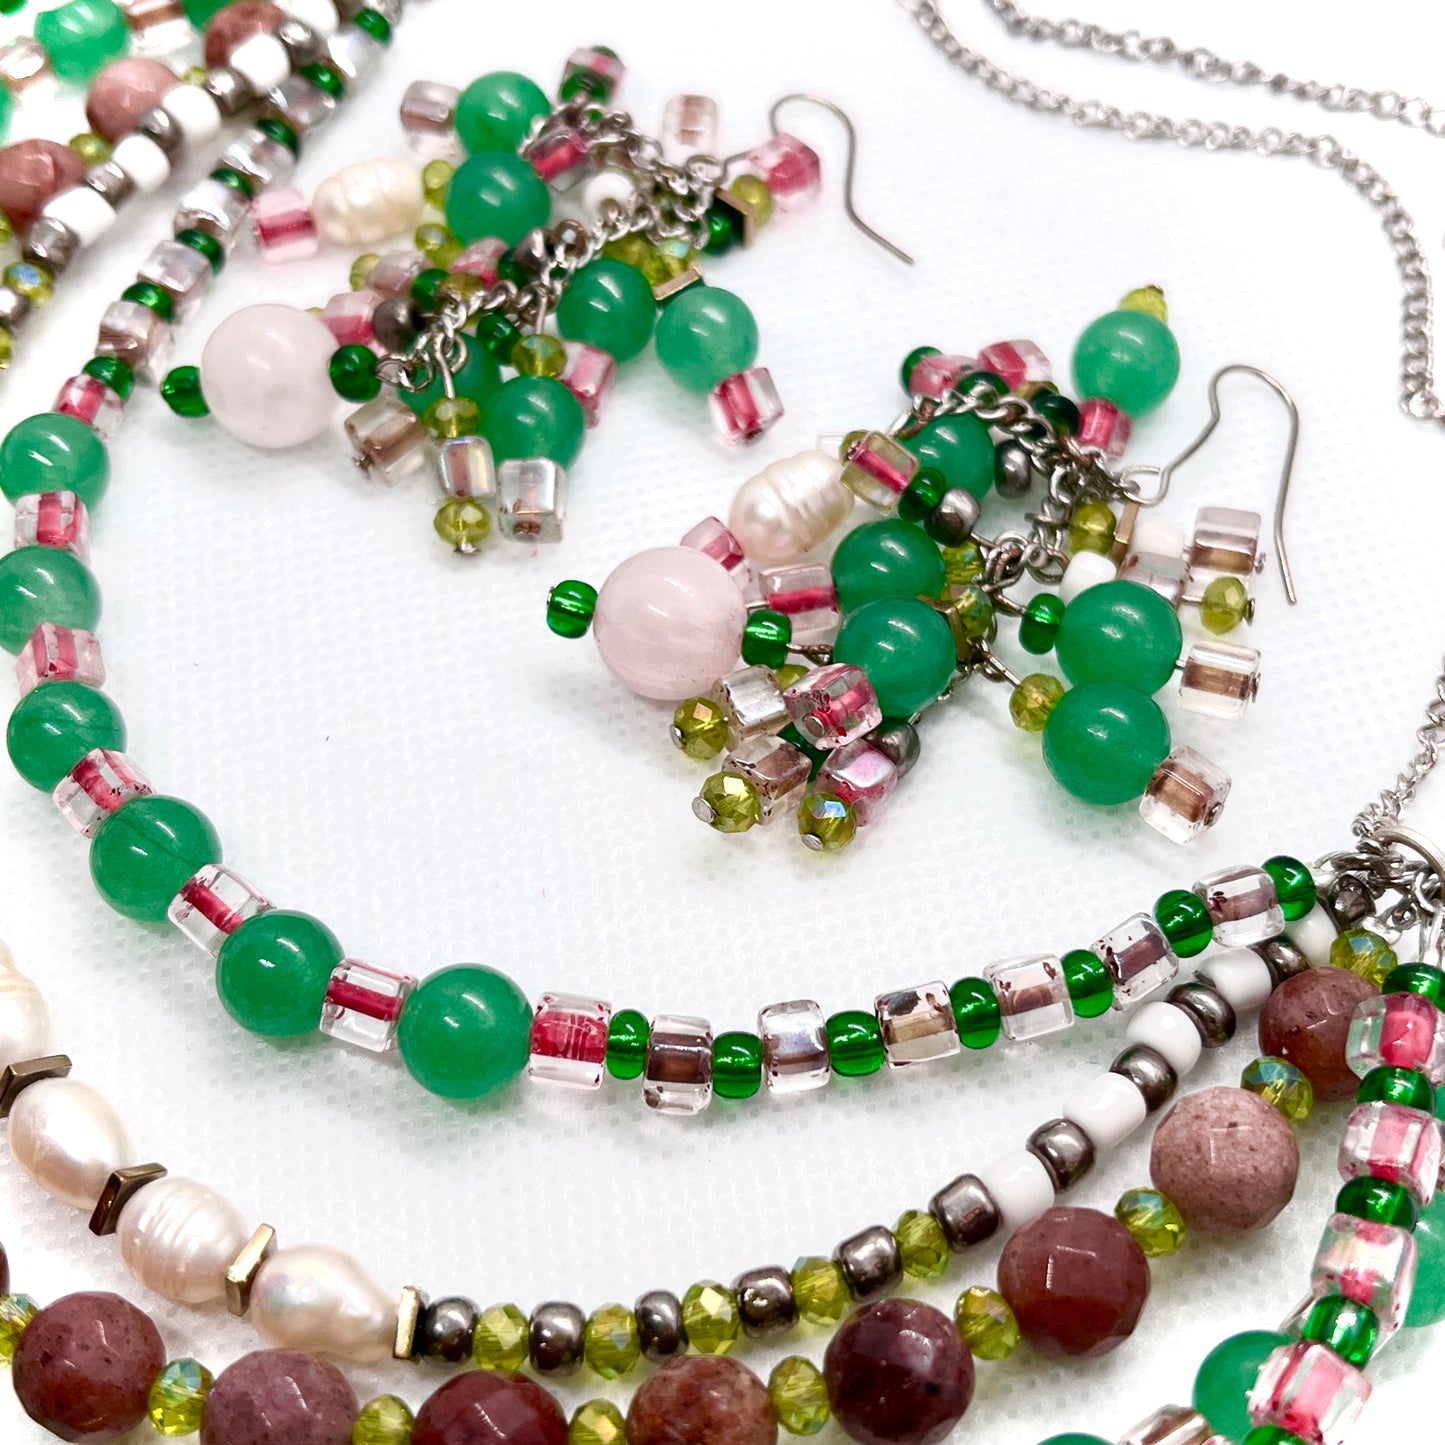 Bunch O’ Beads Necklace and Earrings Set